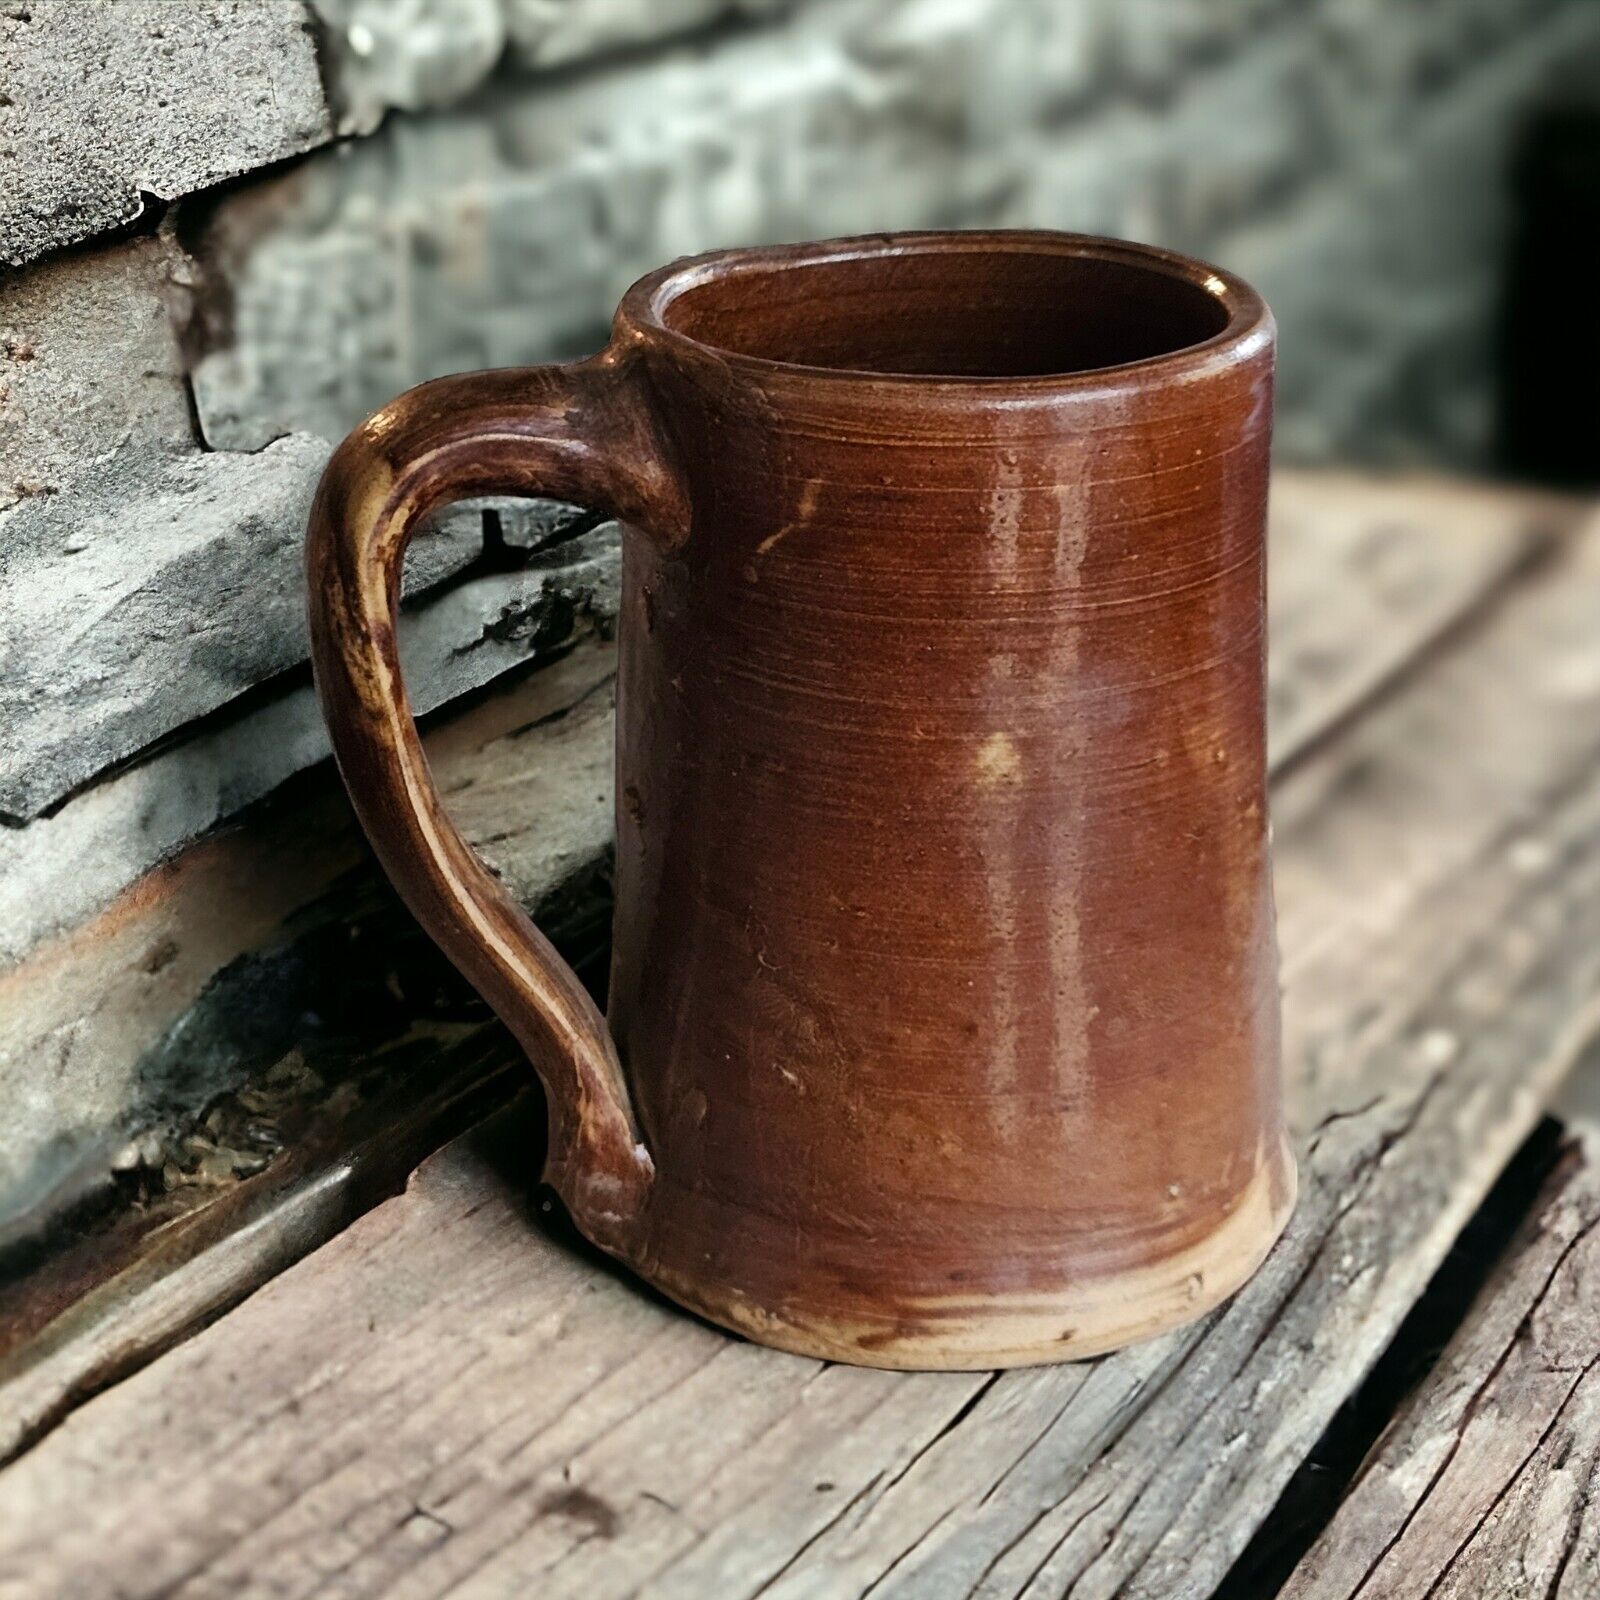 Antique Whiskey White Lightning Mug Collectible Picker's Find